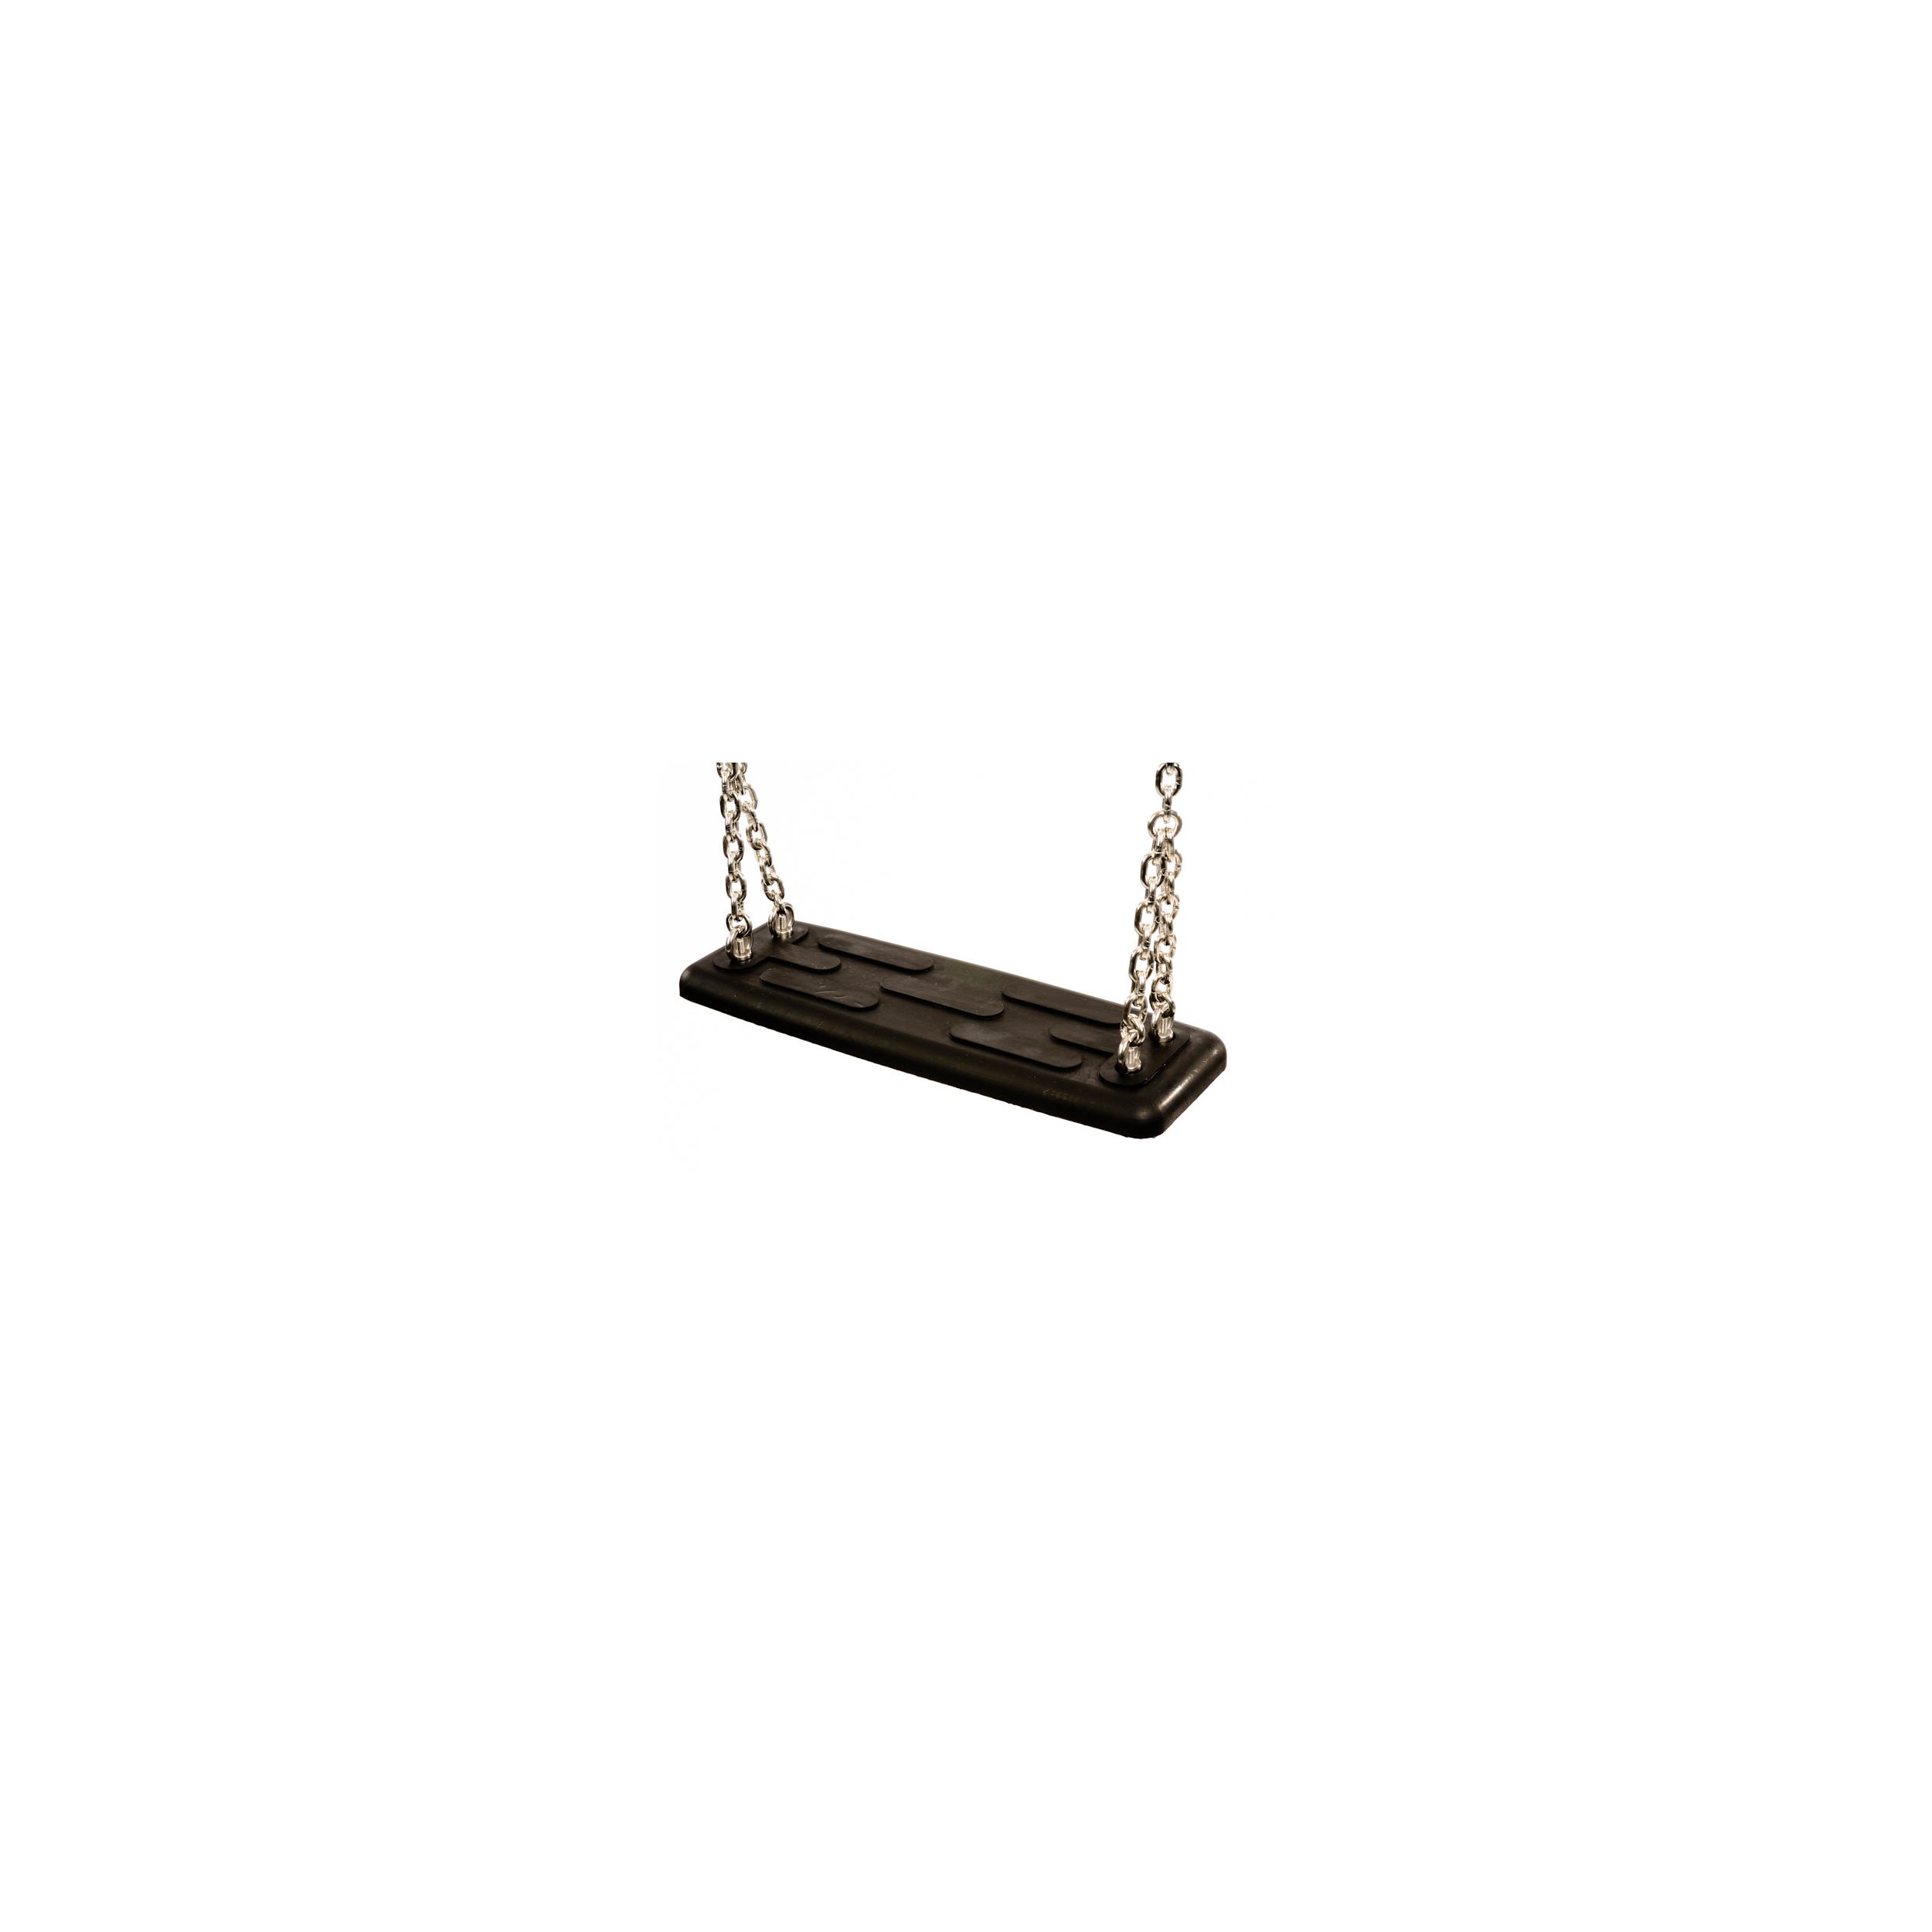 Commercial safety rubber swing seat type 1A black without chains